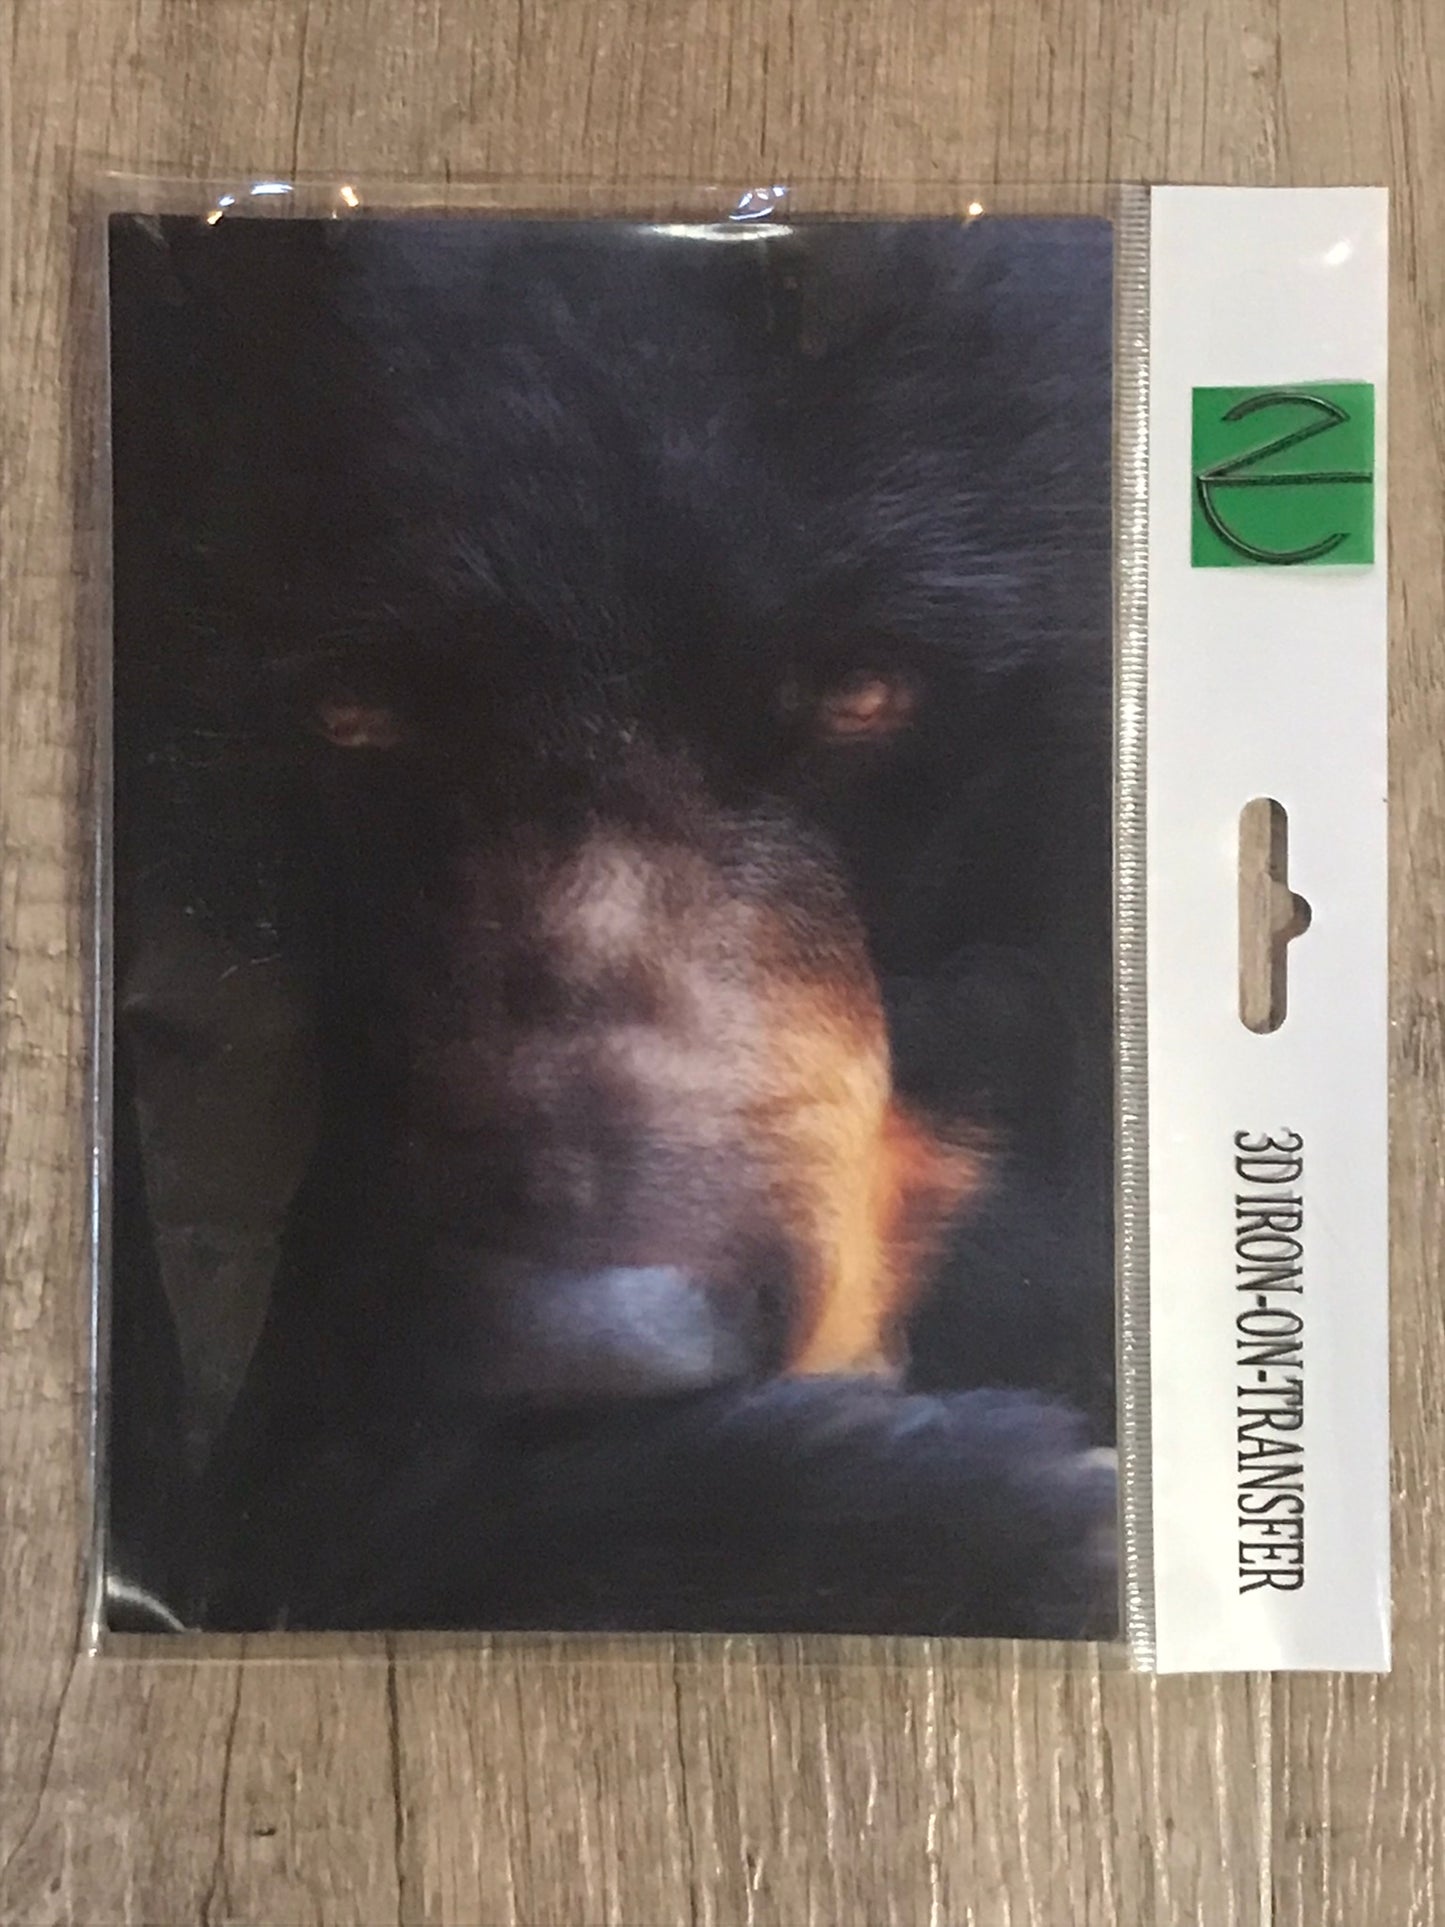 BLACK BEAR FACE 3D LENTICULAR IRON-ON TRANSFER FOR CLOTHING AND ACCESSORIES